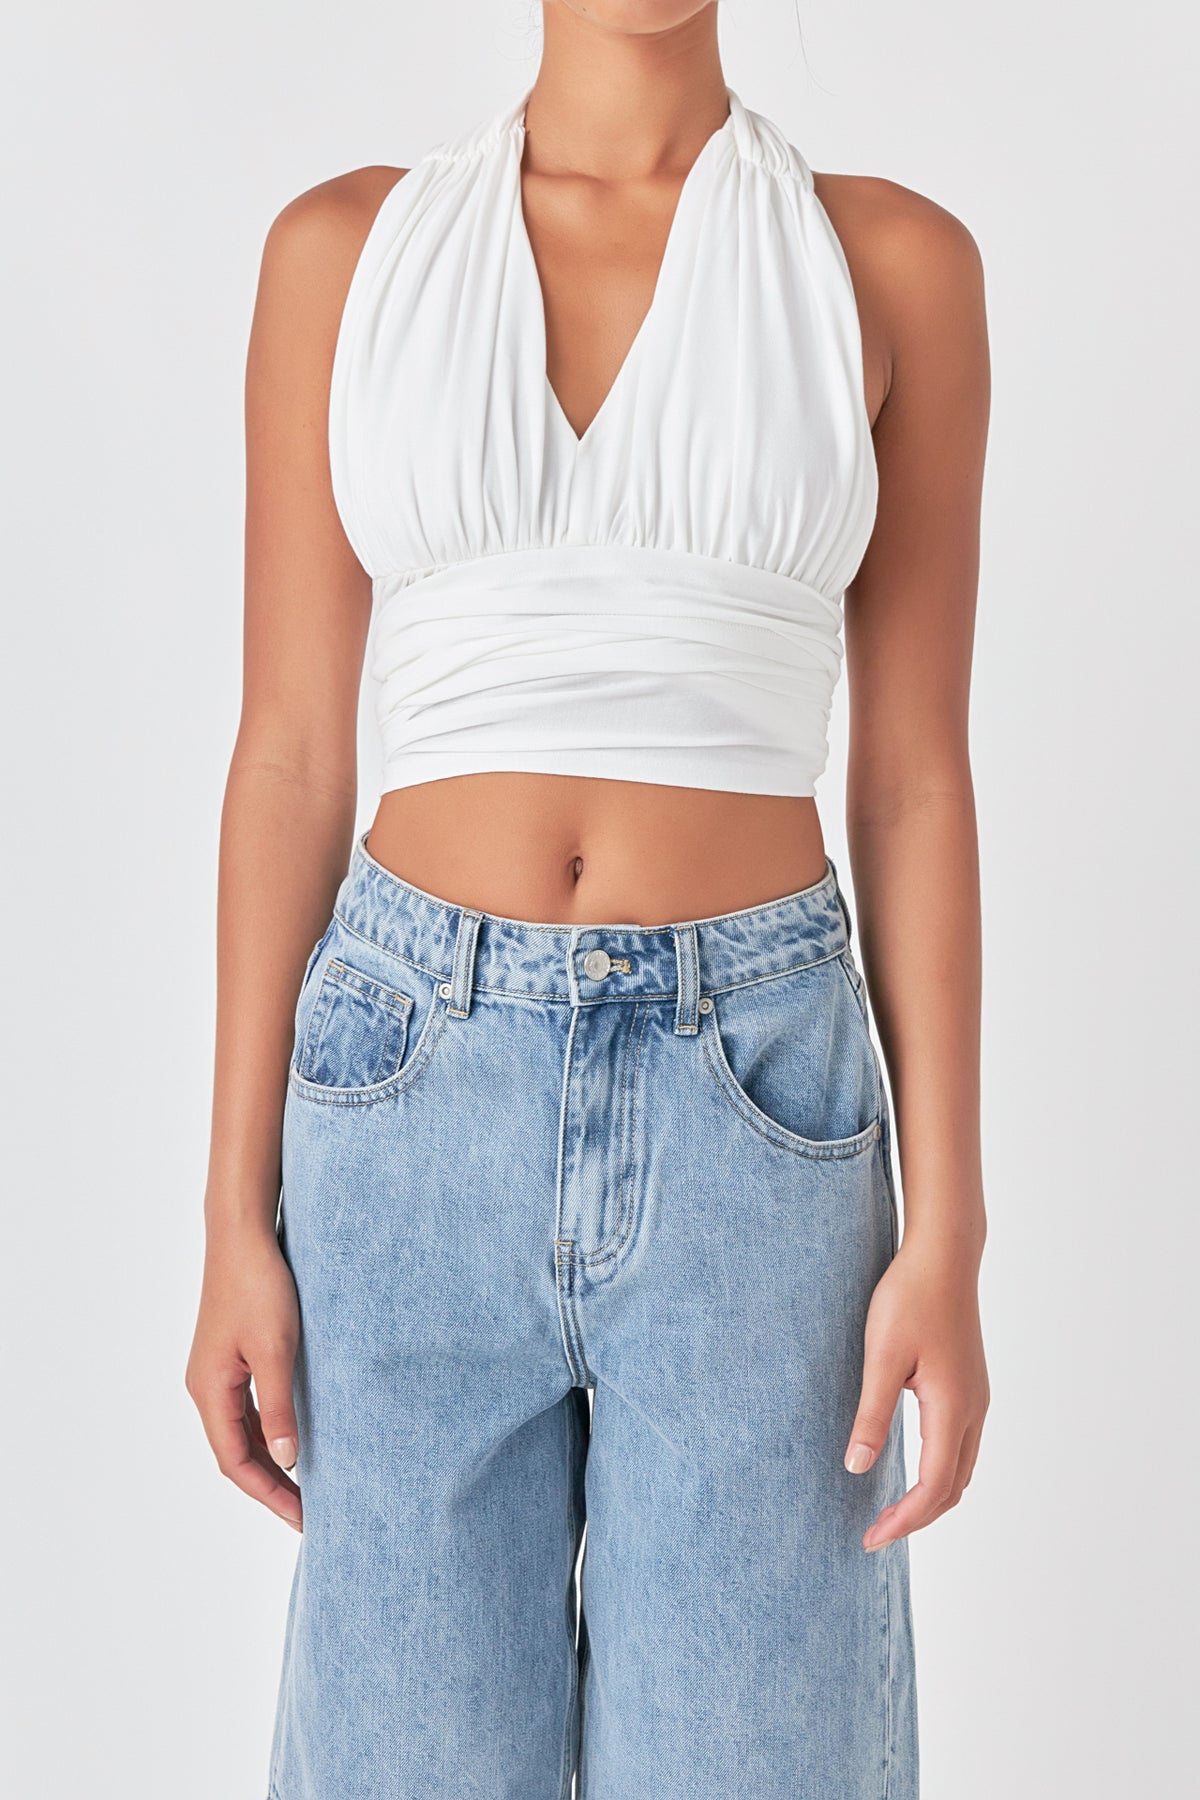 GREY LAB - Convertible Knit Strap Top - TOPS available at Objectrare